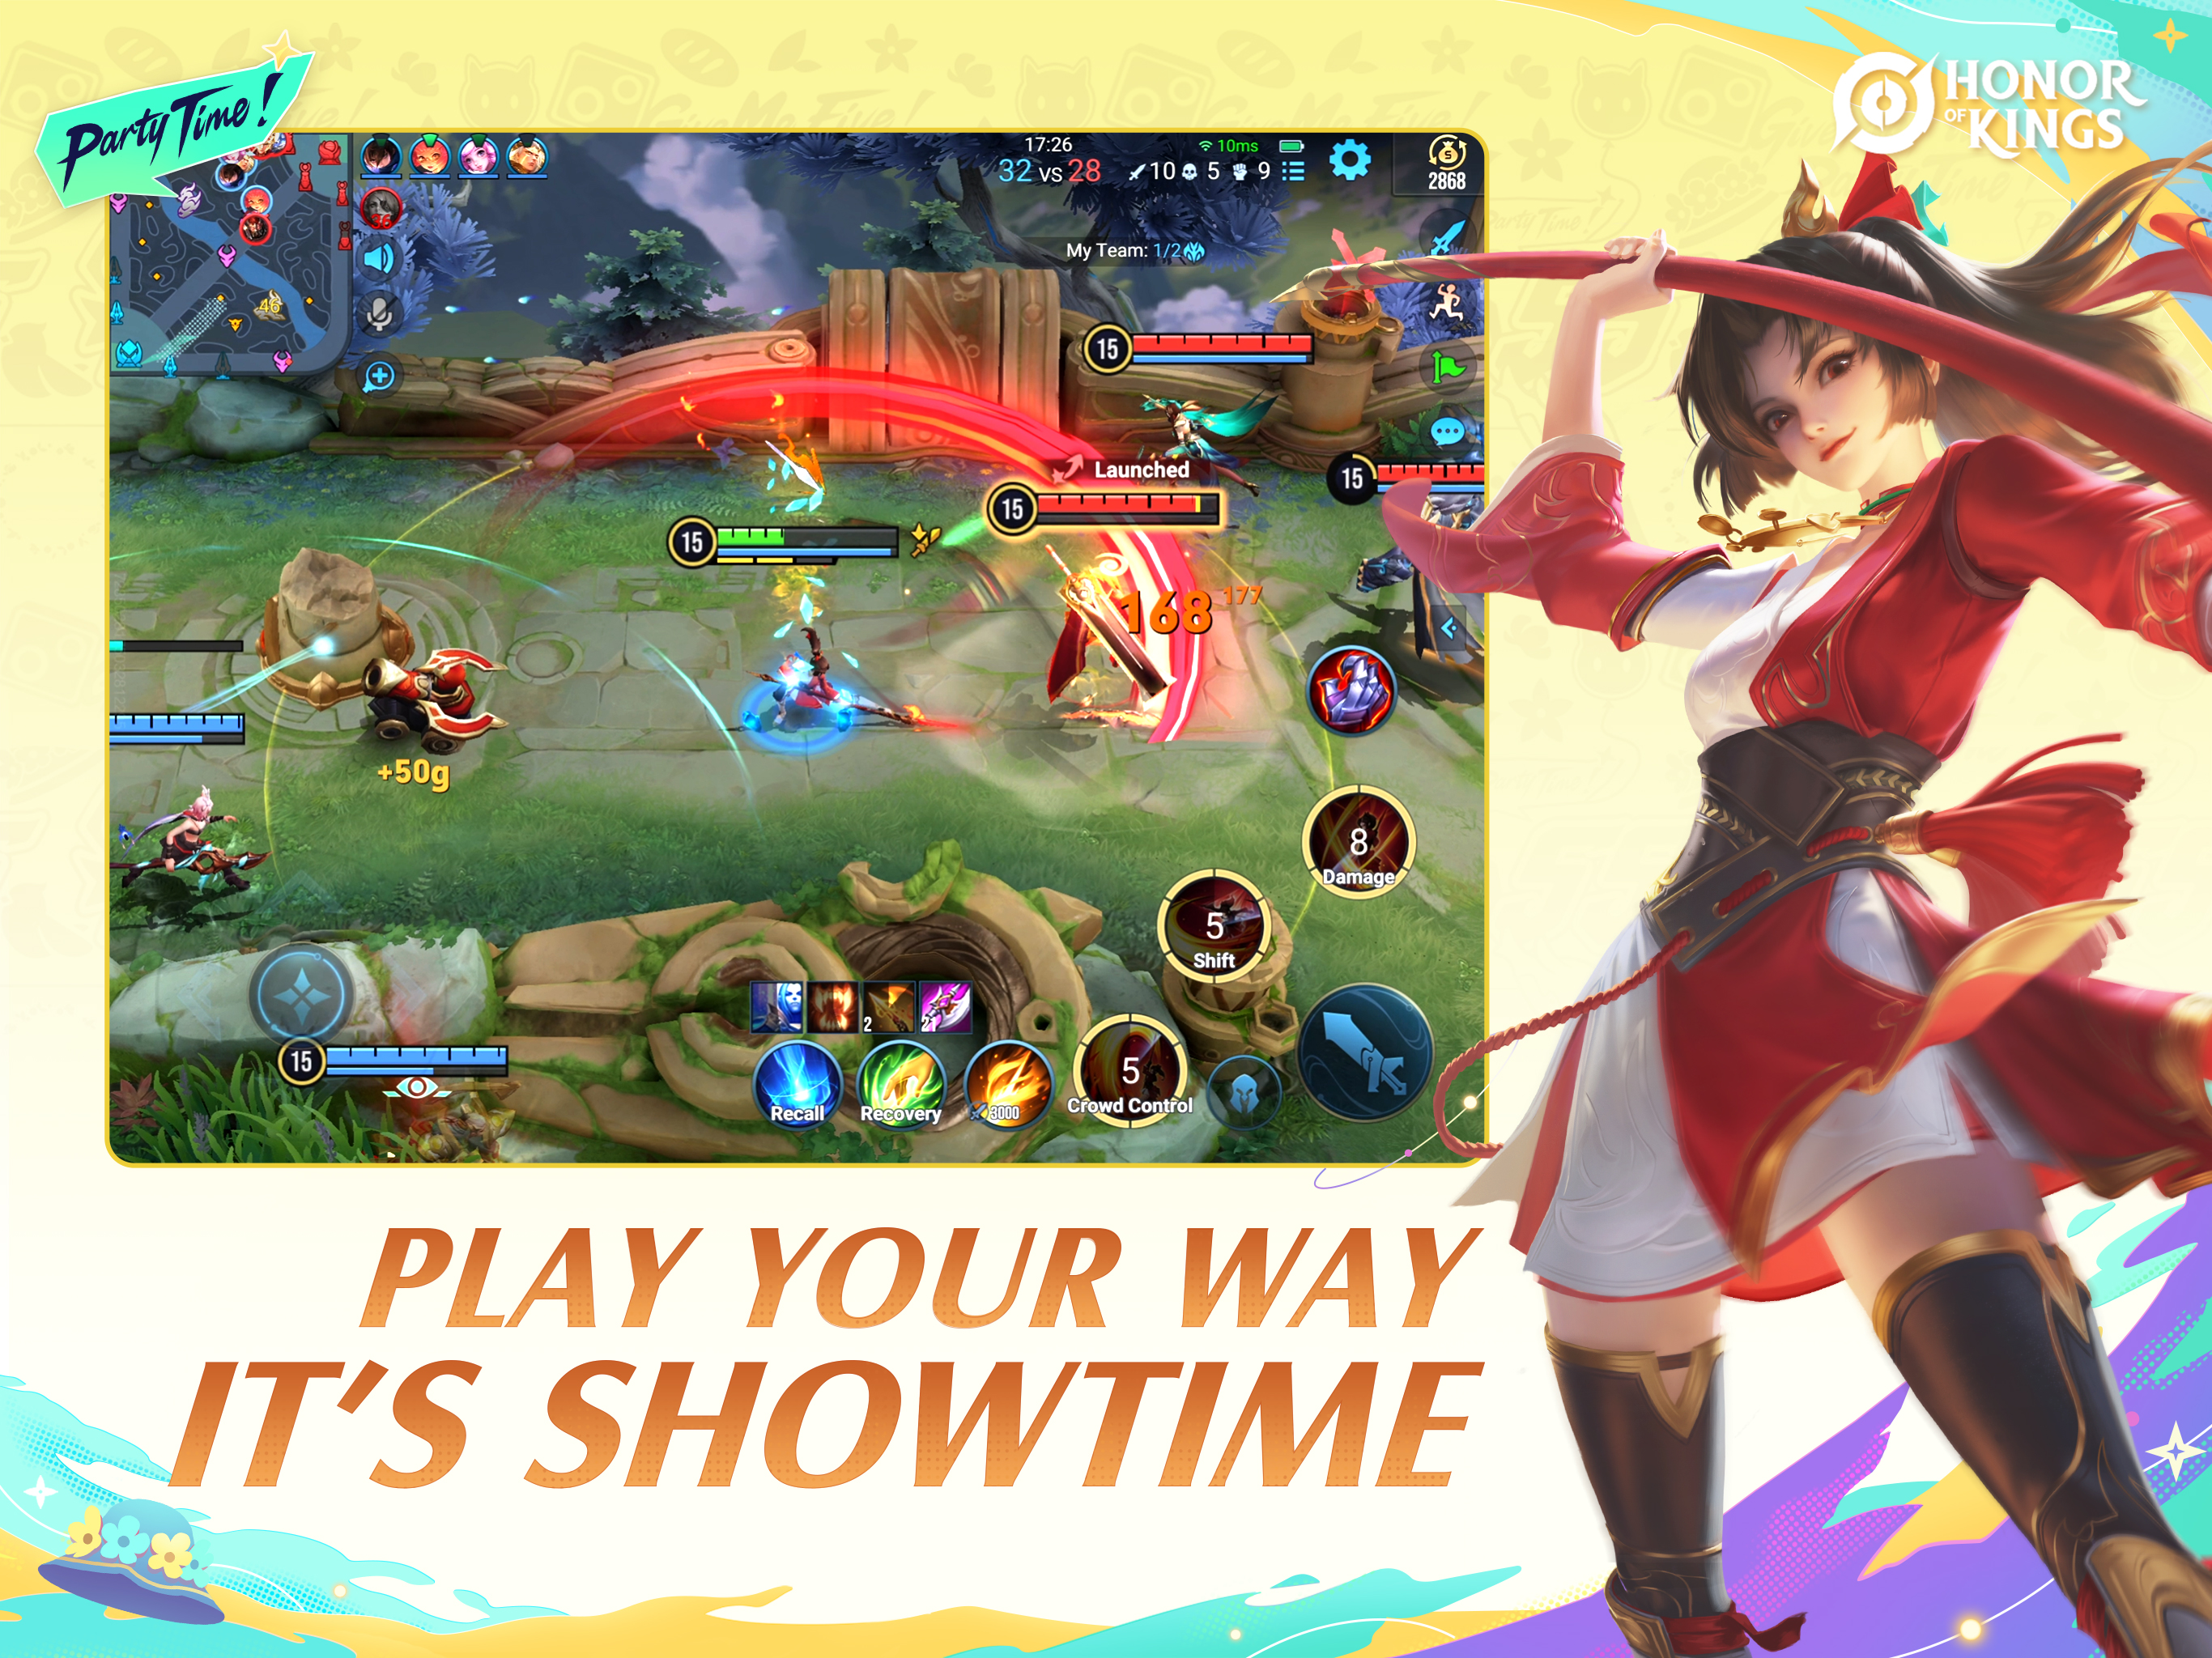 Download and play Honor of Kings on PC with MuMu Player